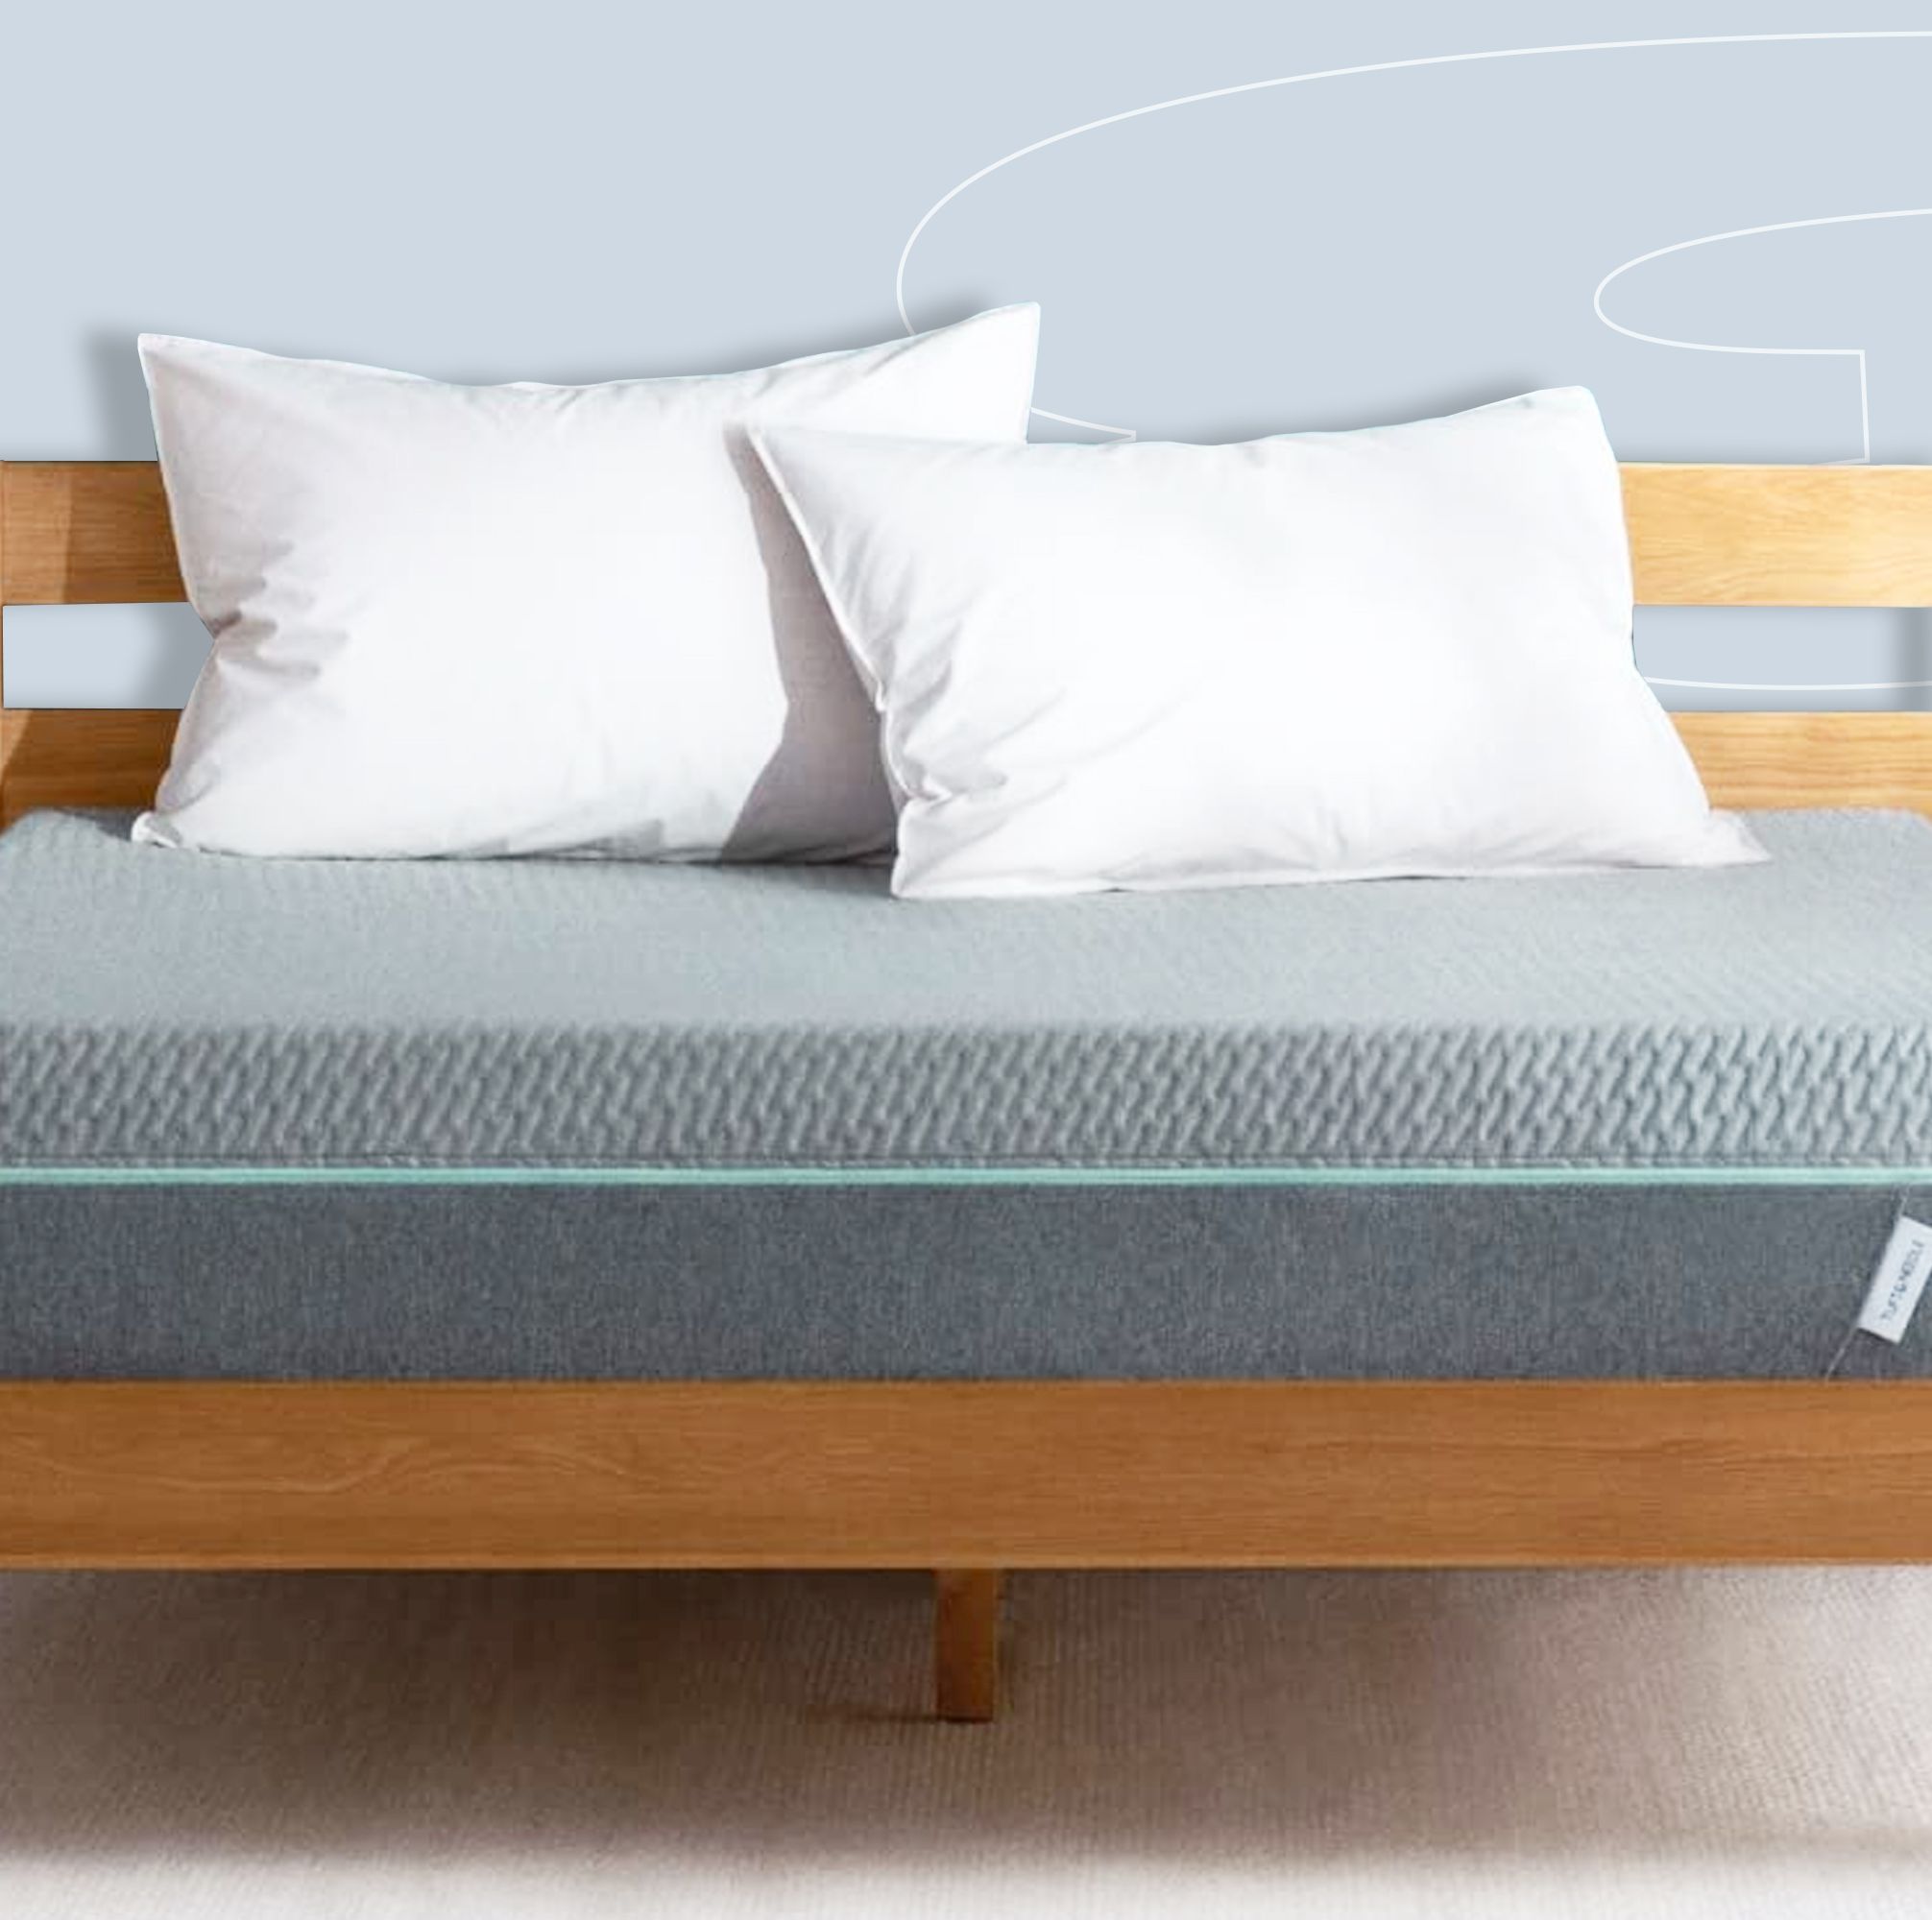 The 6 Best Cooling Mattresses For All-Night Comfort